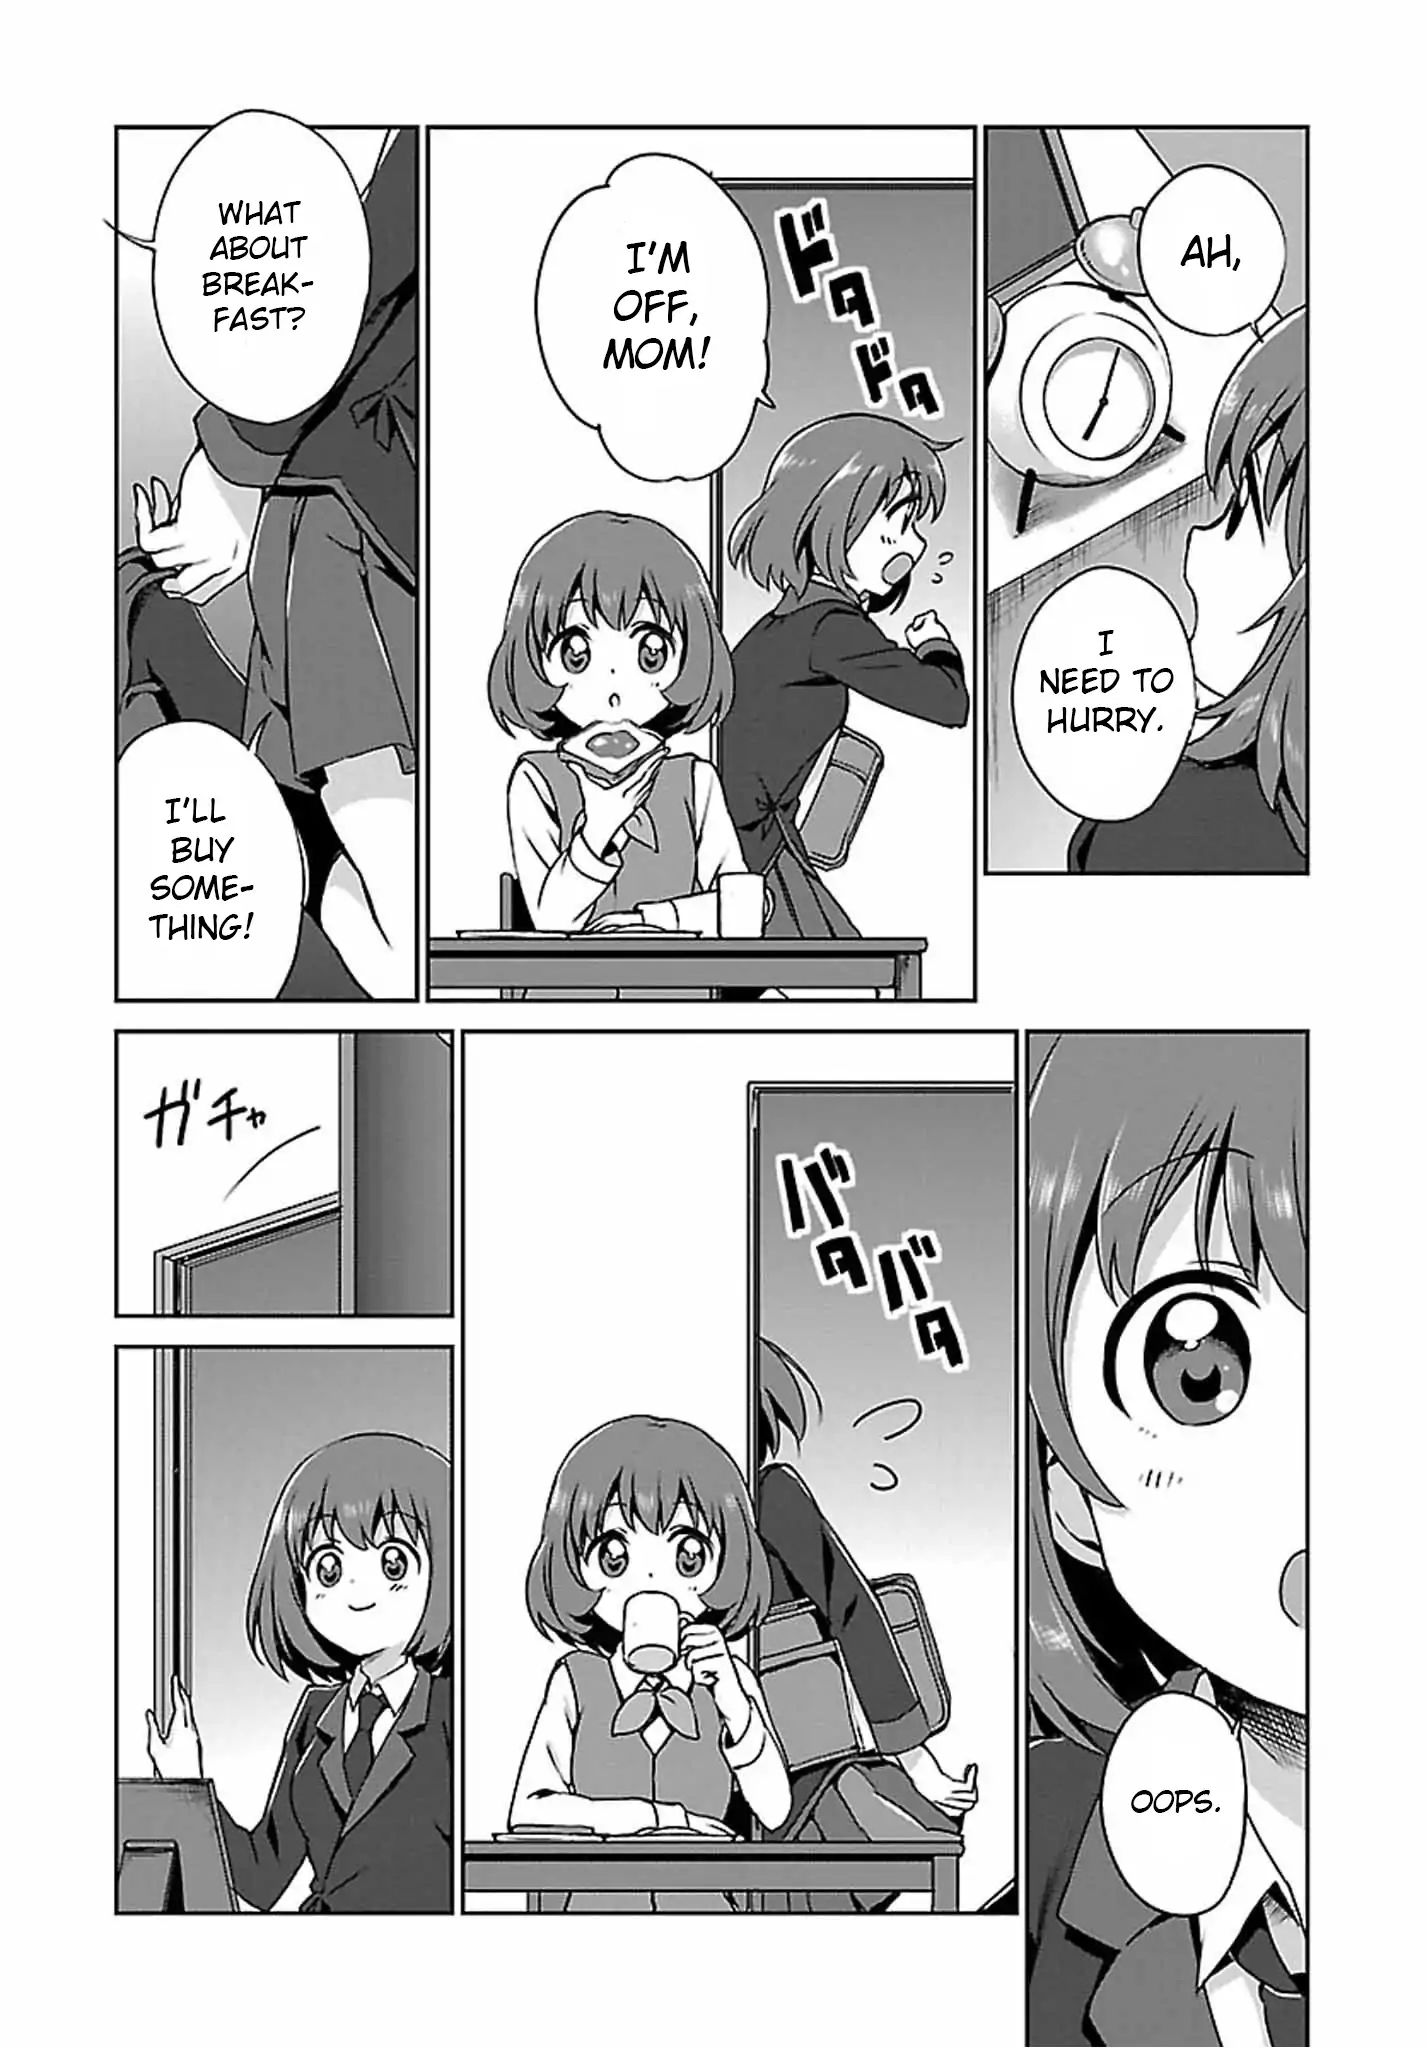 Release The Spyce - Secret Mission - Page 2